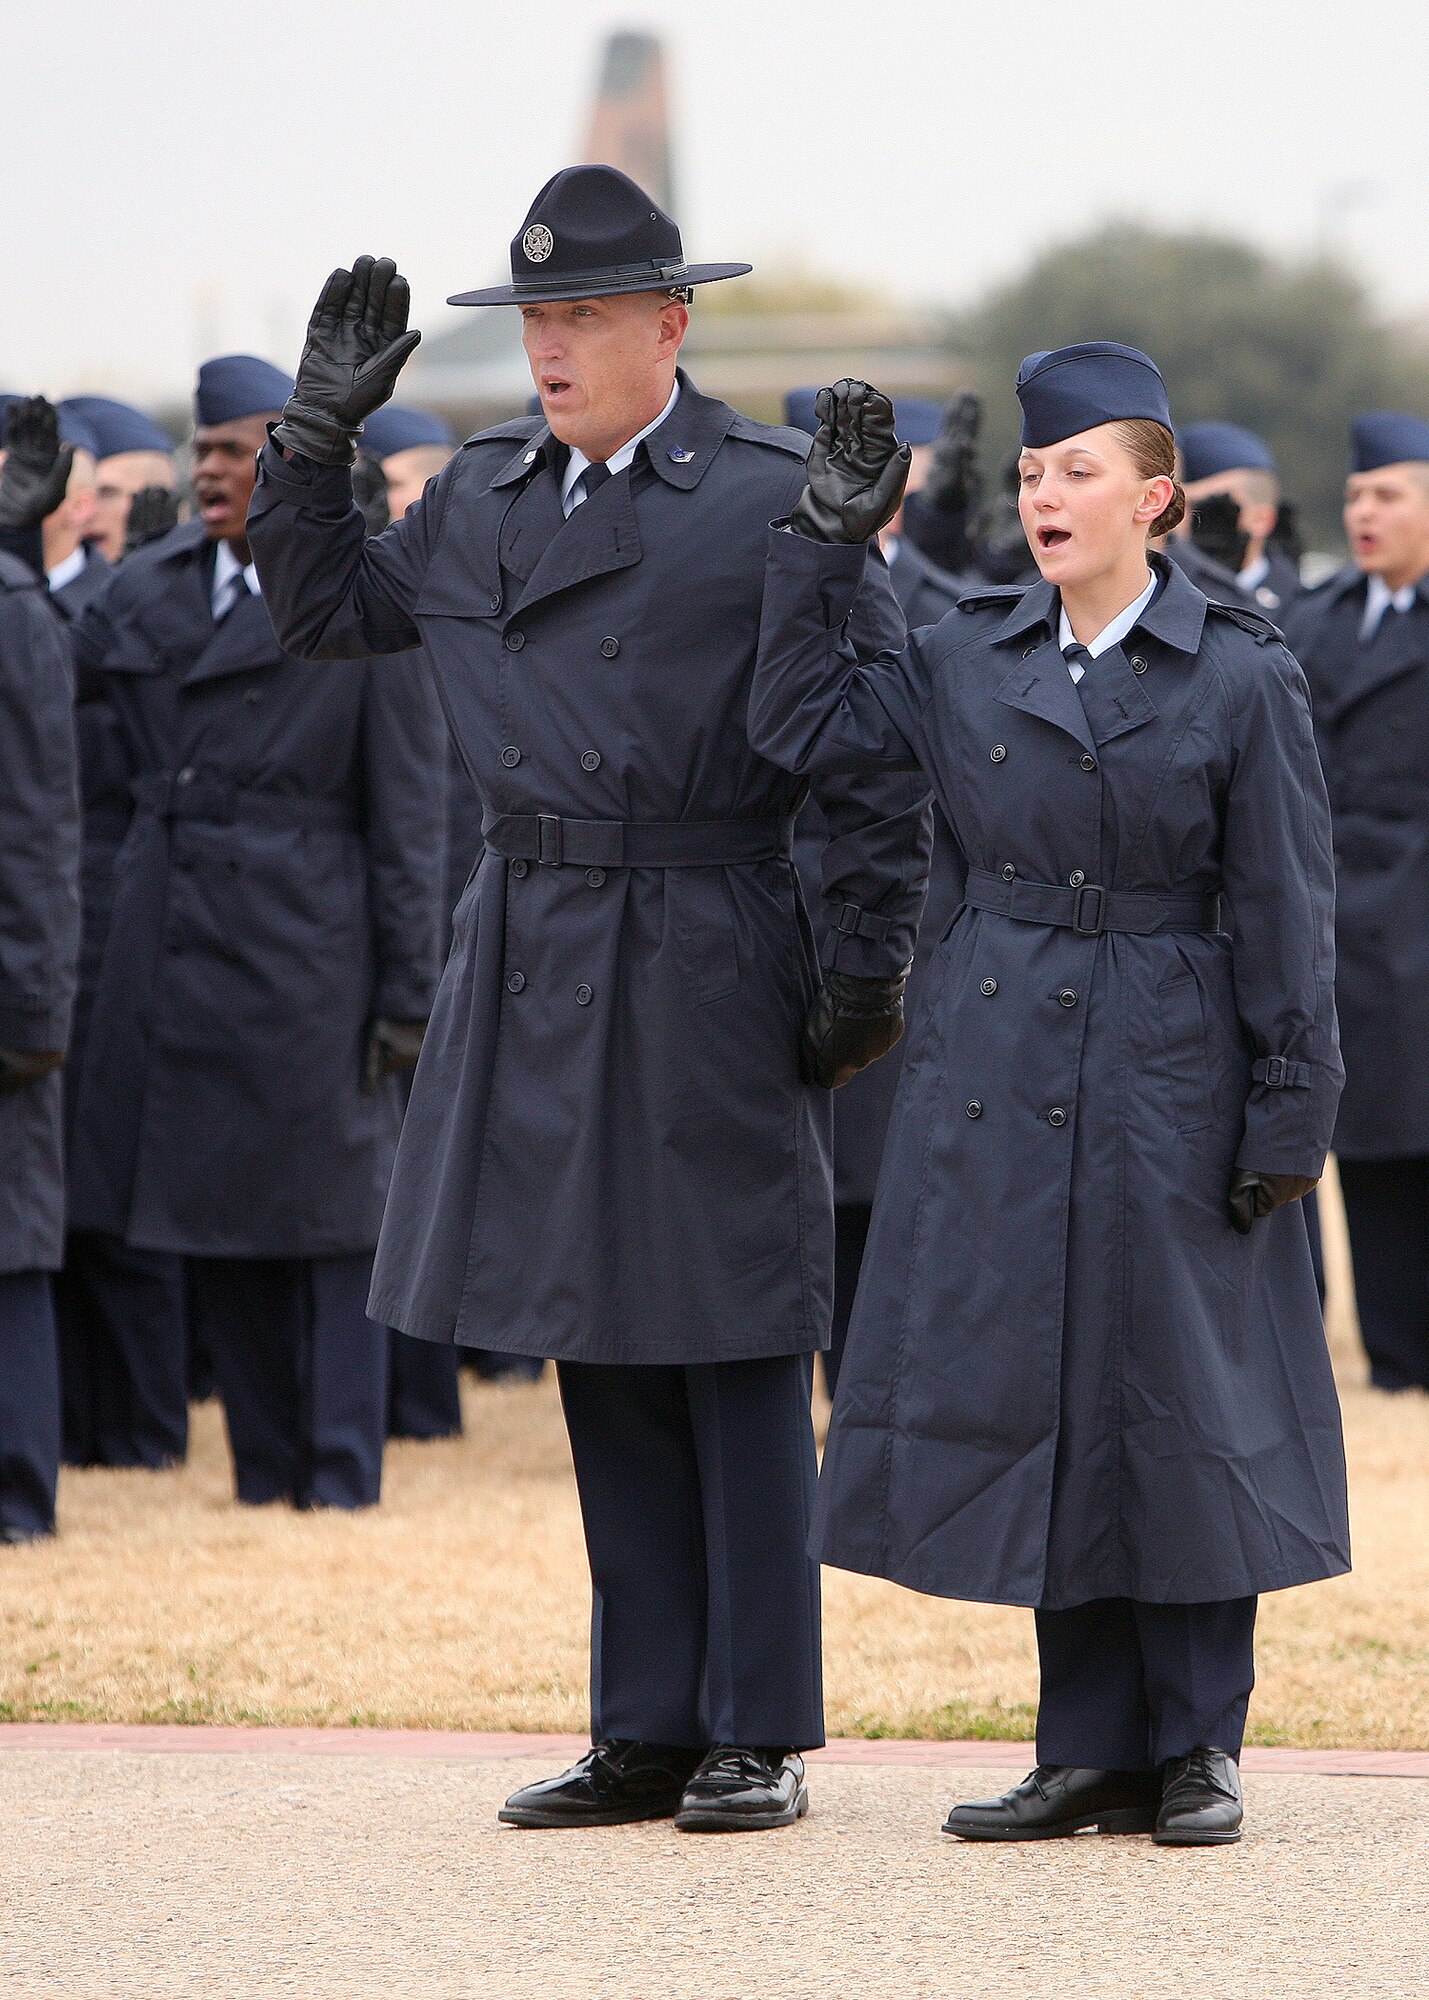 Re-enlistee, Tech. Sgt. Robert Rayburn, a military training instructor with the 331st Training Squadron, takes the Oath of Enlistment alongside his daughter, Airman Marlana Rayburn, during a basic military graduation parade at the Lackland Parade Grounds Jan. 4. (USAF photo by Robbin Cresswell) 